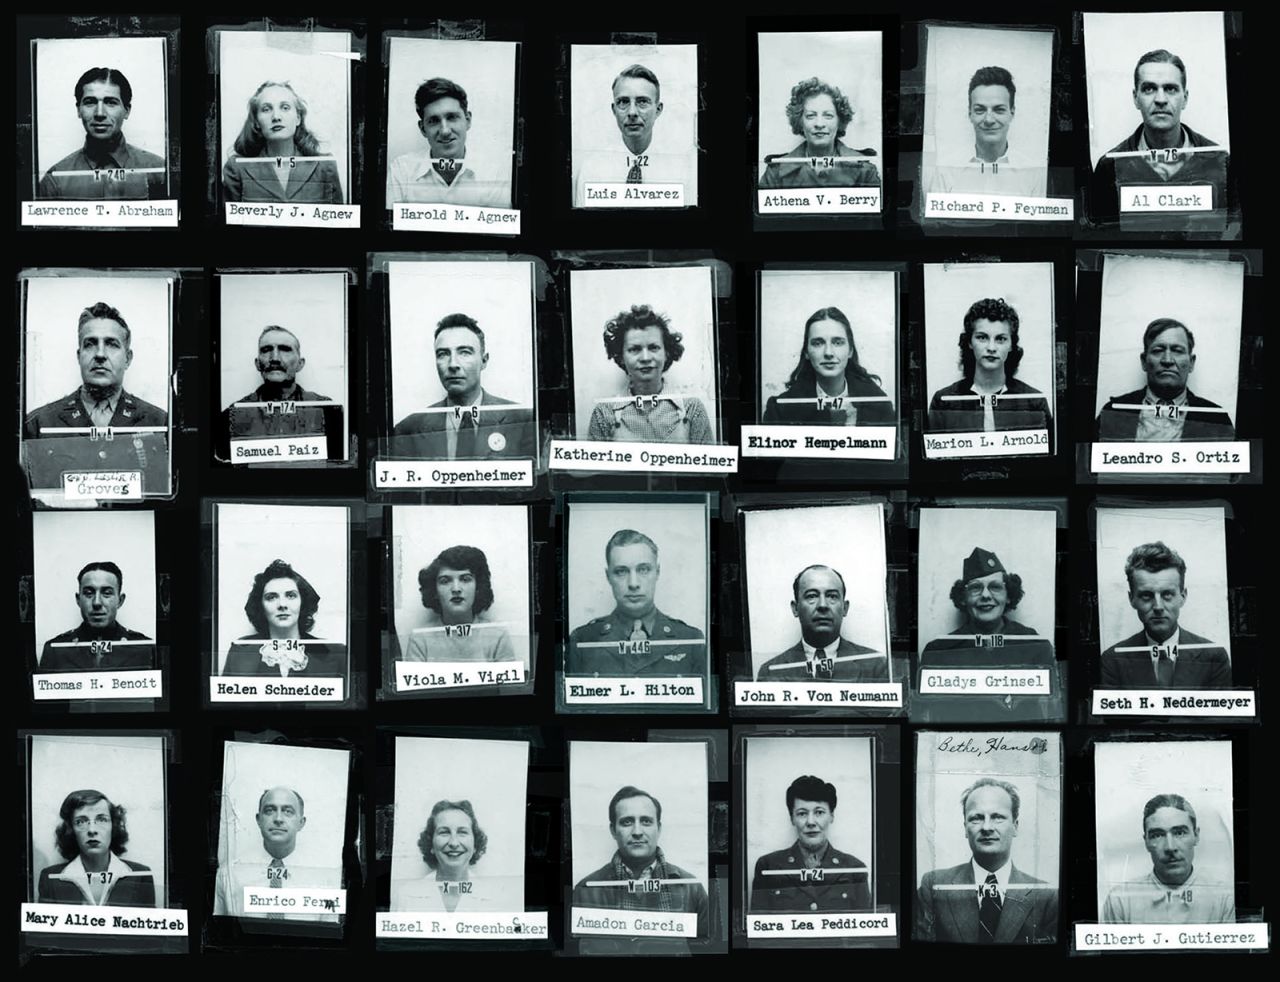 These photos show some of the people who worked on the Manhattan Project at the Los Alamos National Laboratory in New Mexico. US Army Col. Leslie R. Groves, second row on the left, was appointed to head the project. Physicist J. Robert Oppenheimer led the lab at Los Alamos.